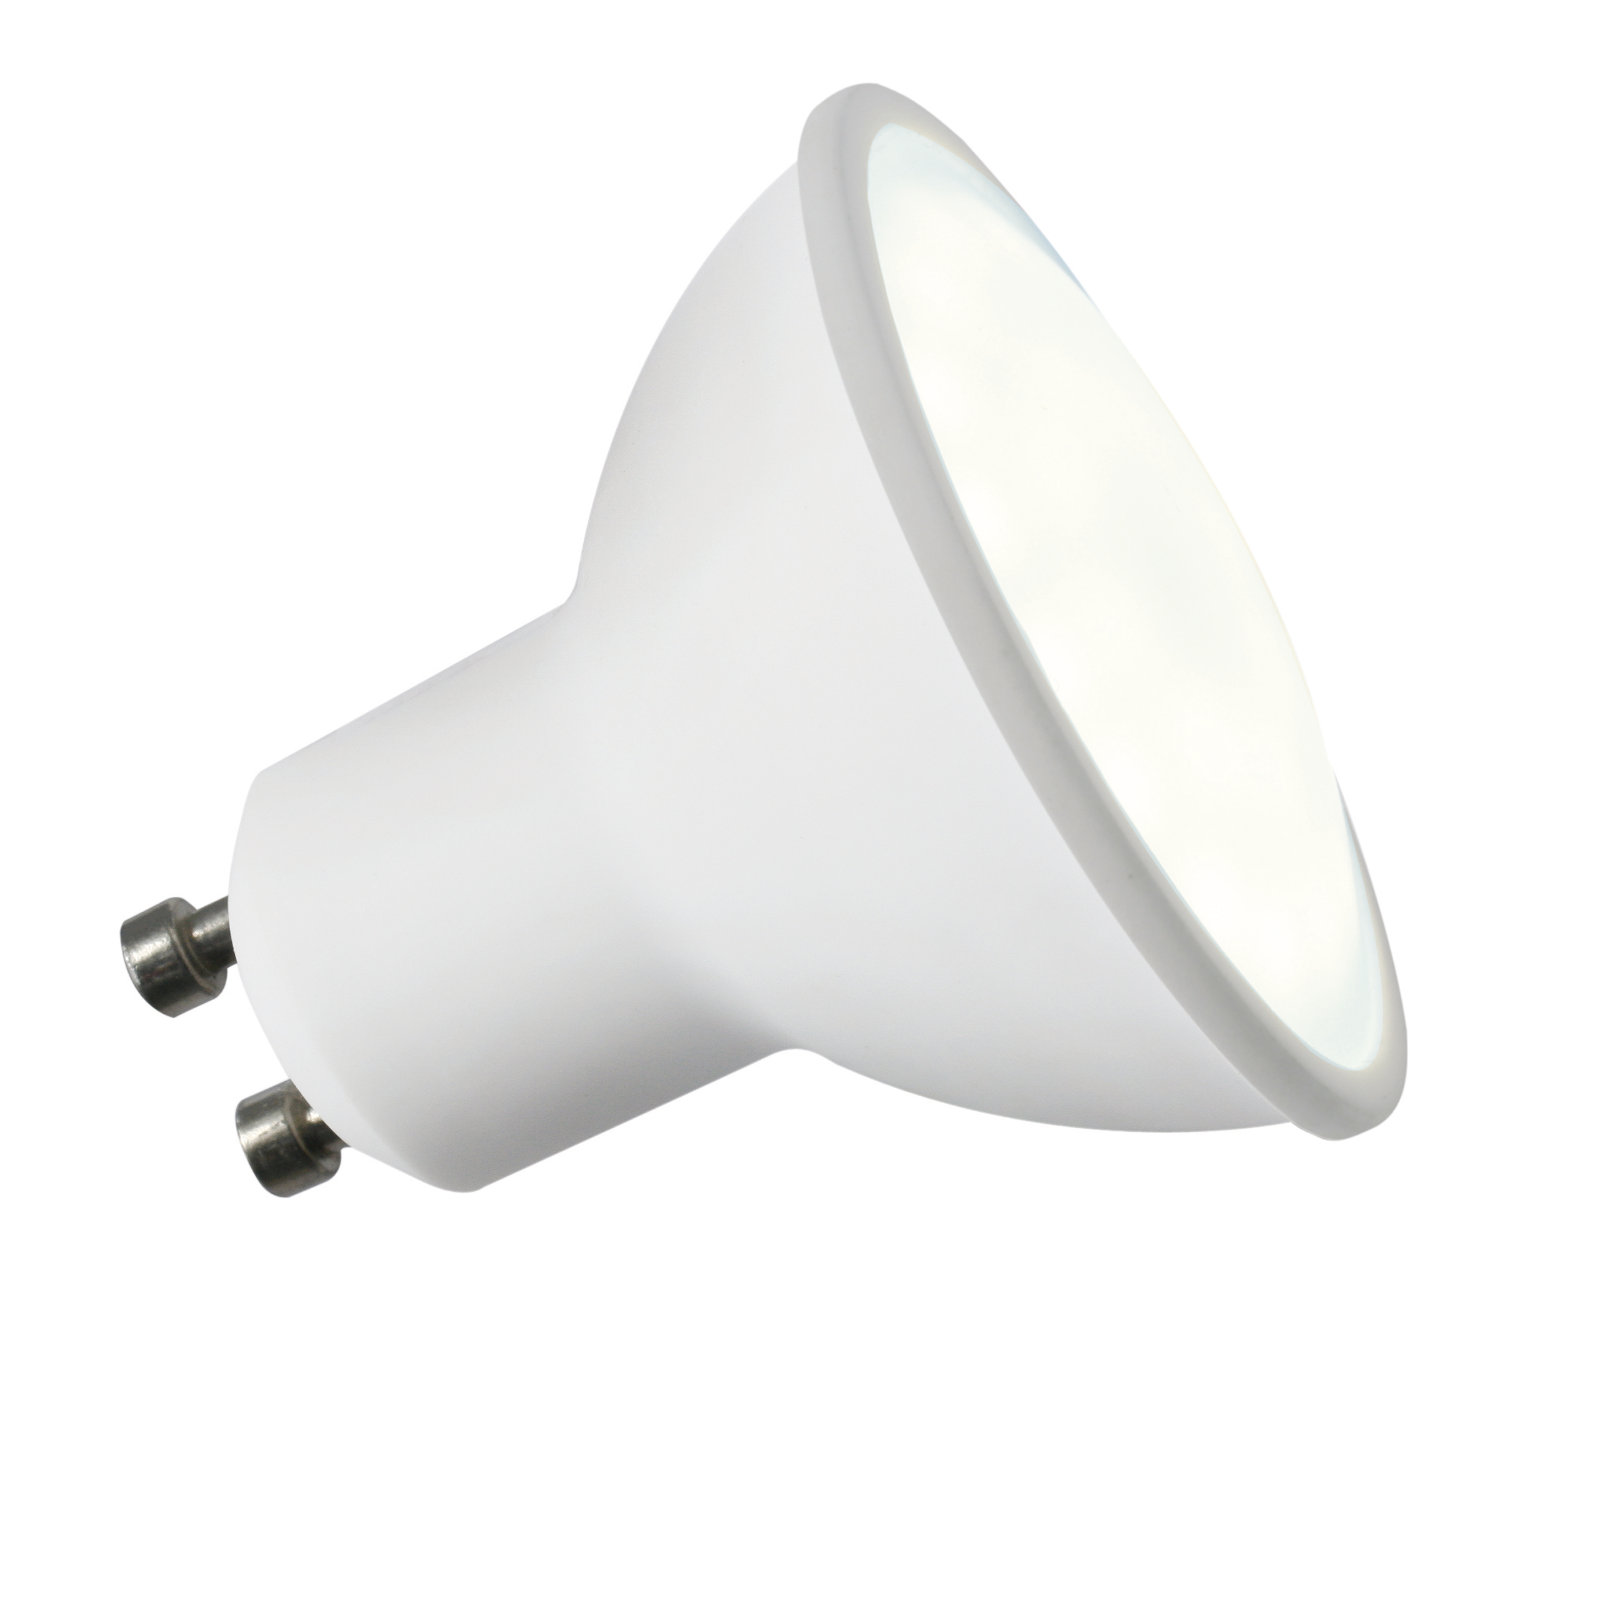 ML Accessories-GUSM5DL 230V GU10 LED 5W 6000K Daylight 6000K (non-dimmable)